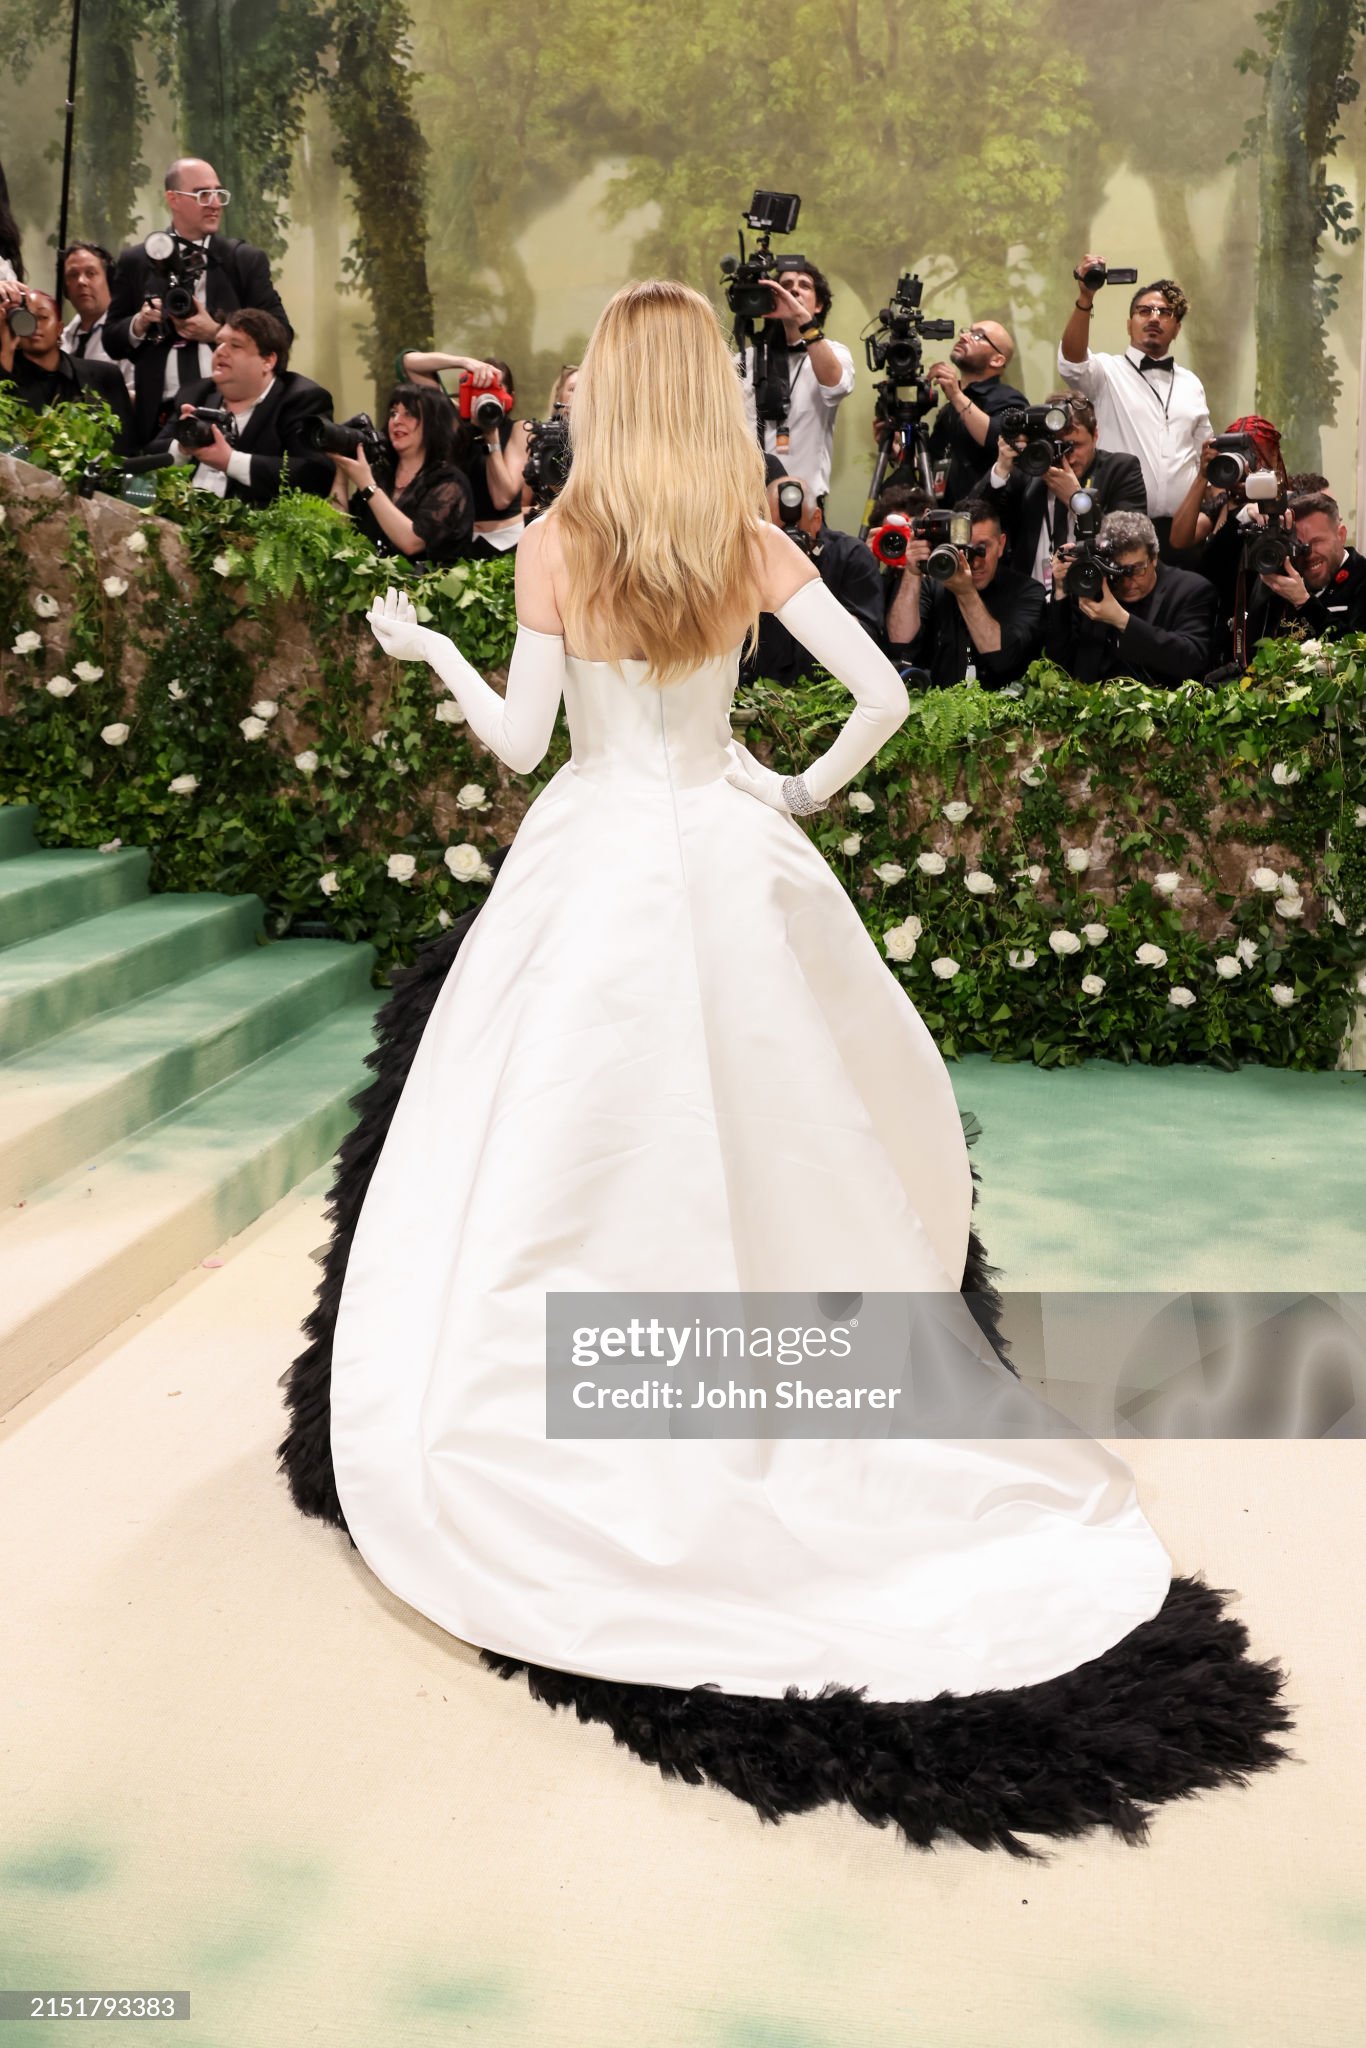 gettyimages-2151793383-2048x2048.jpg